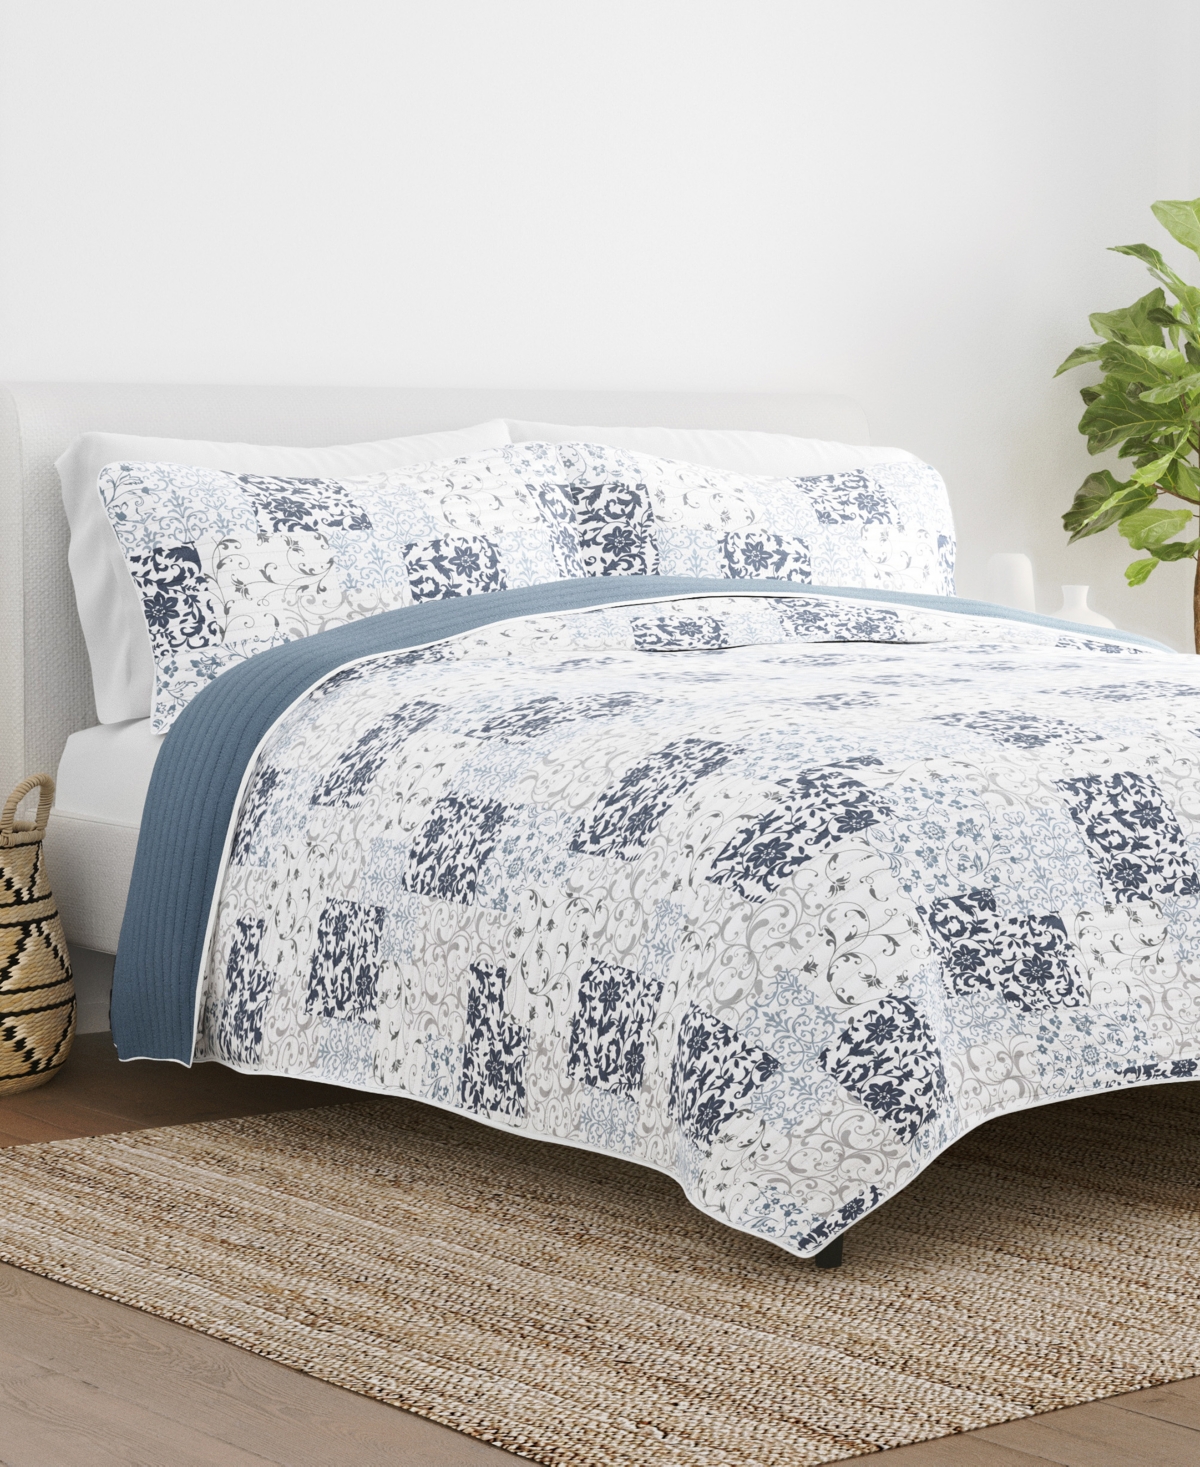 Ienjoy Home All Season 3 Piece Scrolled Patchwork Reversible Quilt Set, King/california King In Dusk Blue